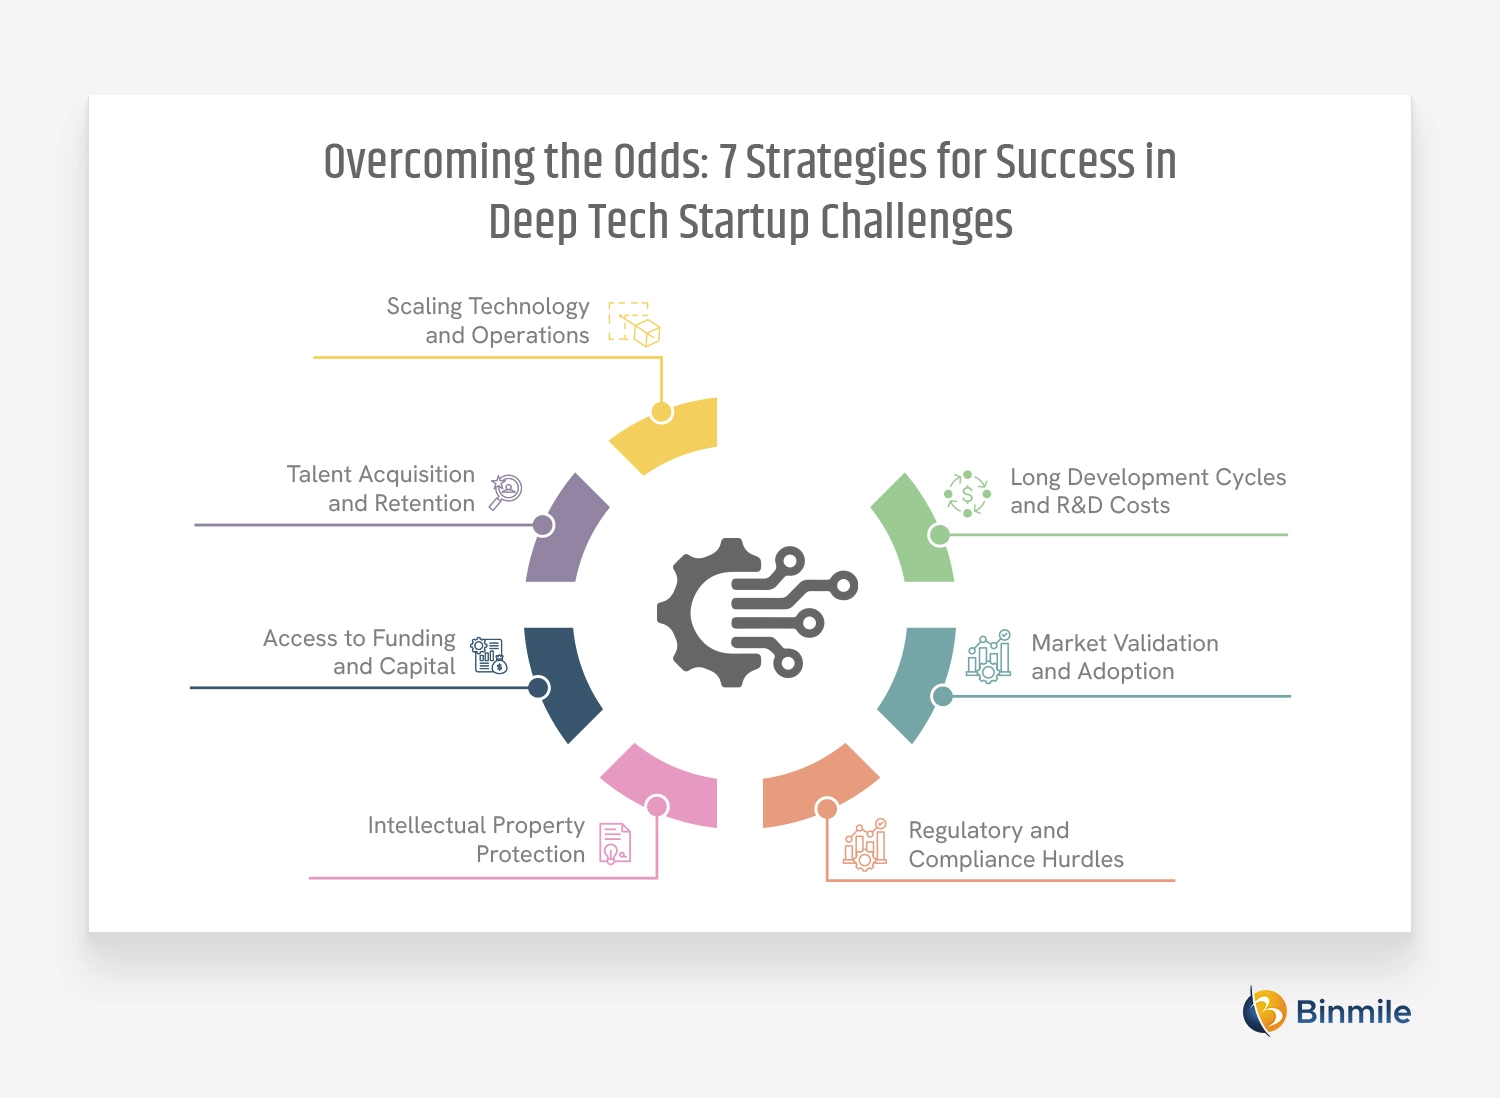 7 Strategies for Success in Deep Tech Startup Challenges | Binmile